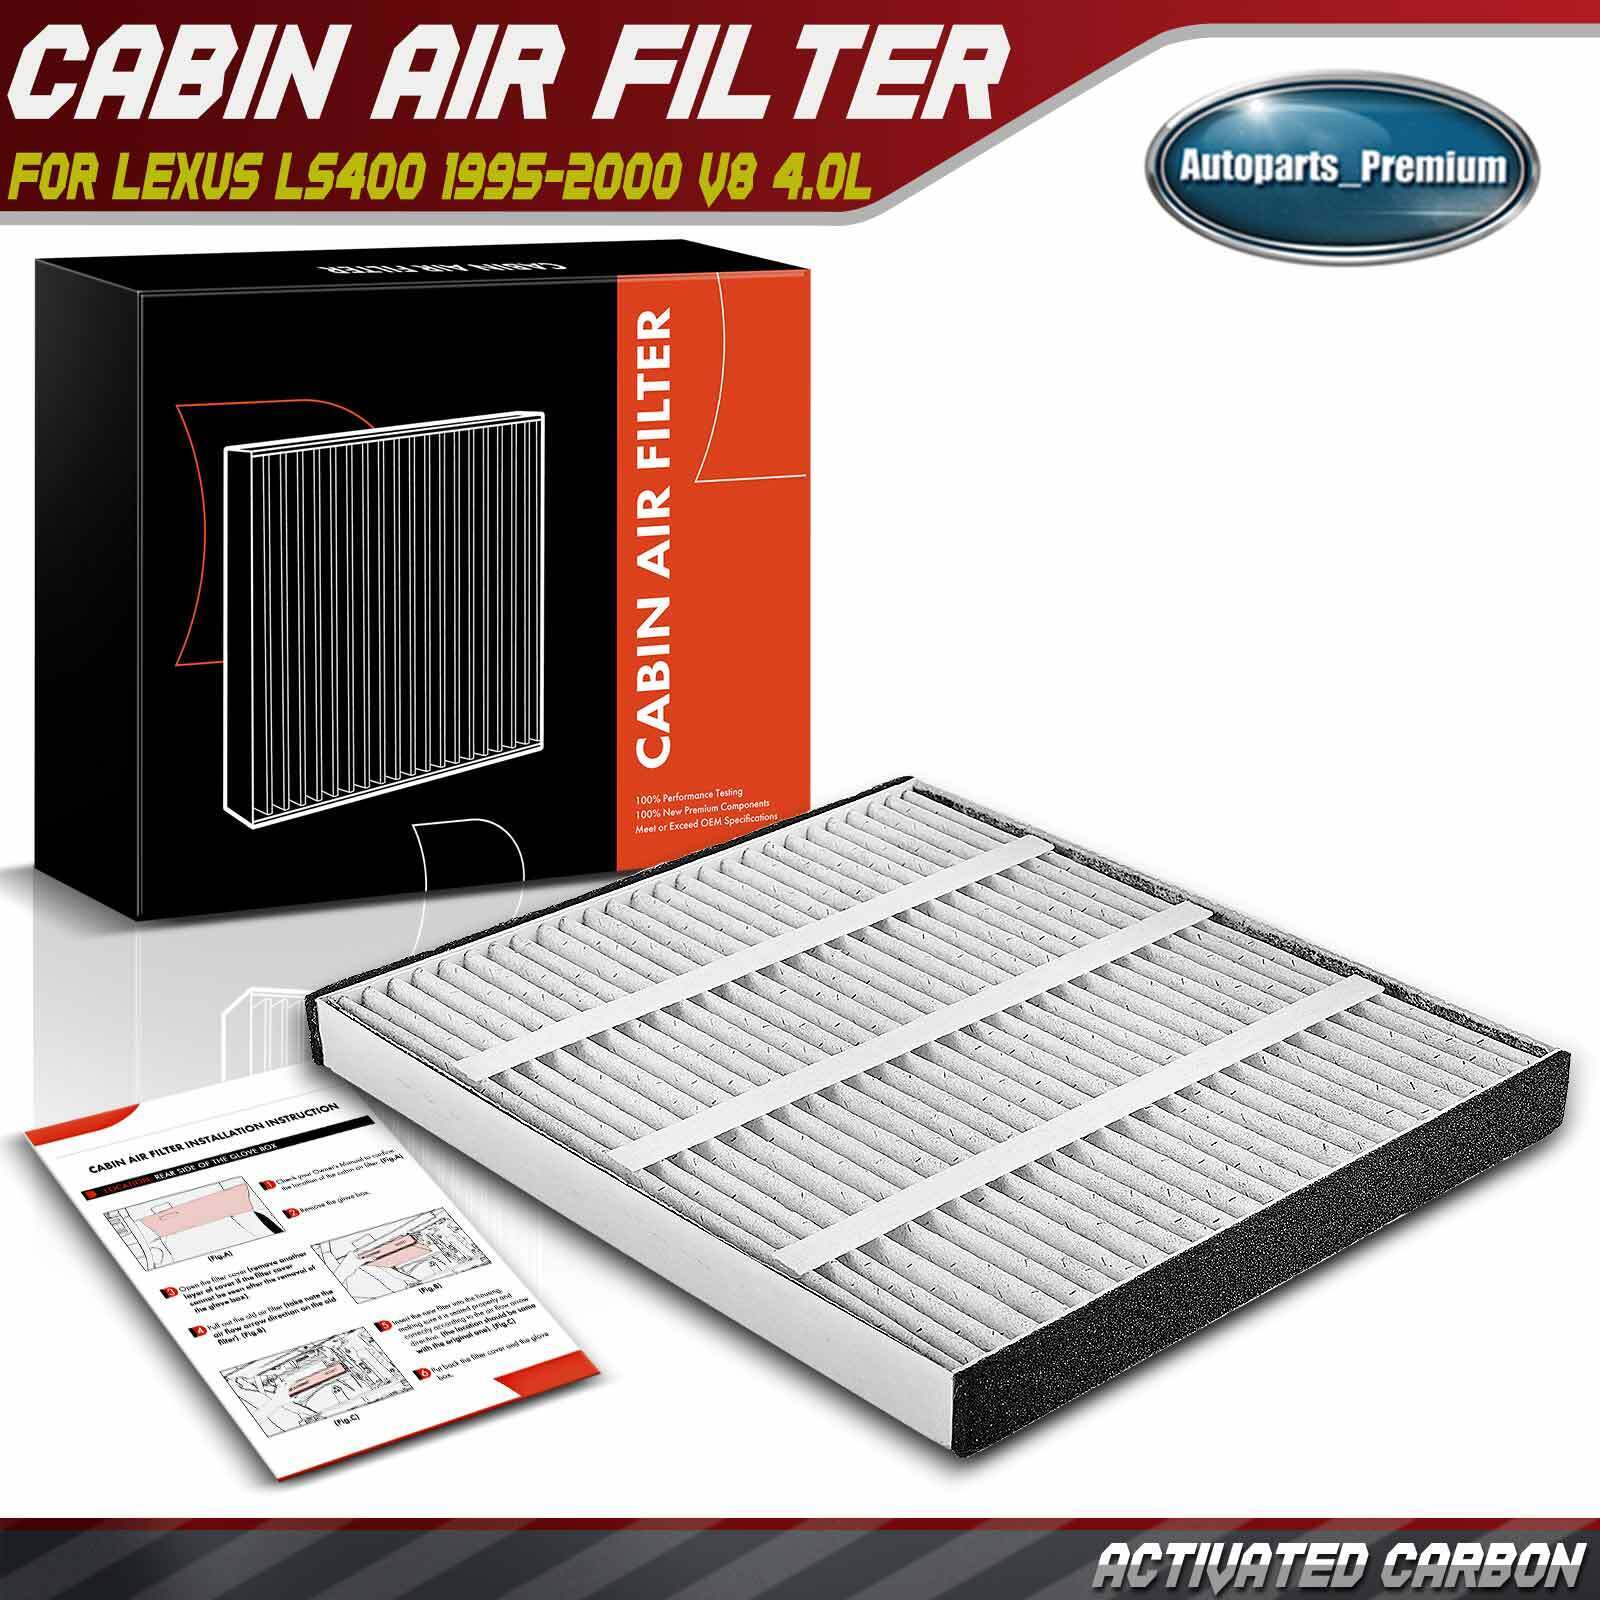 Activated Carbon Cabin Air Filter for Lexus LS400 95-00 Under Driver Side Dash